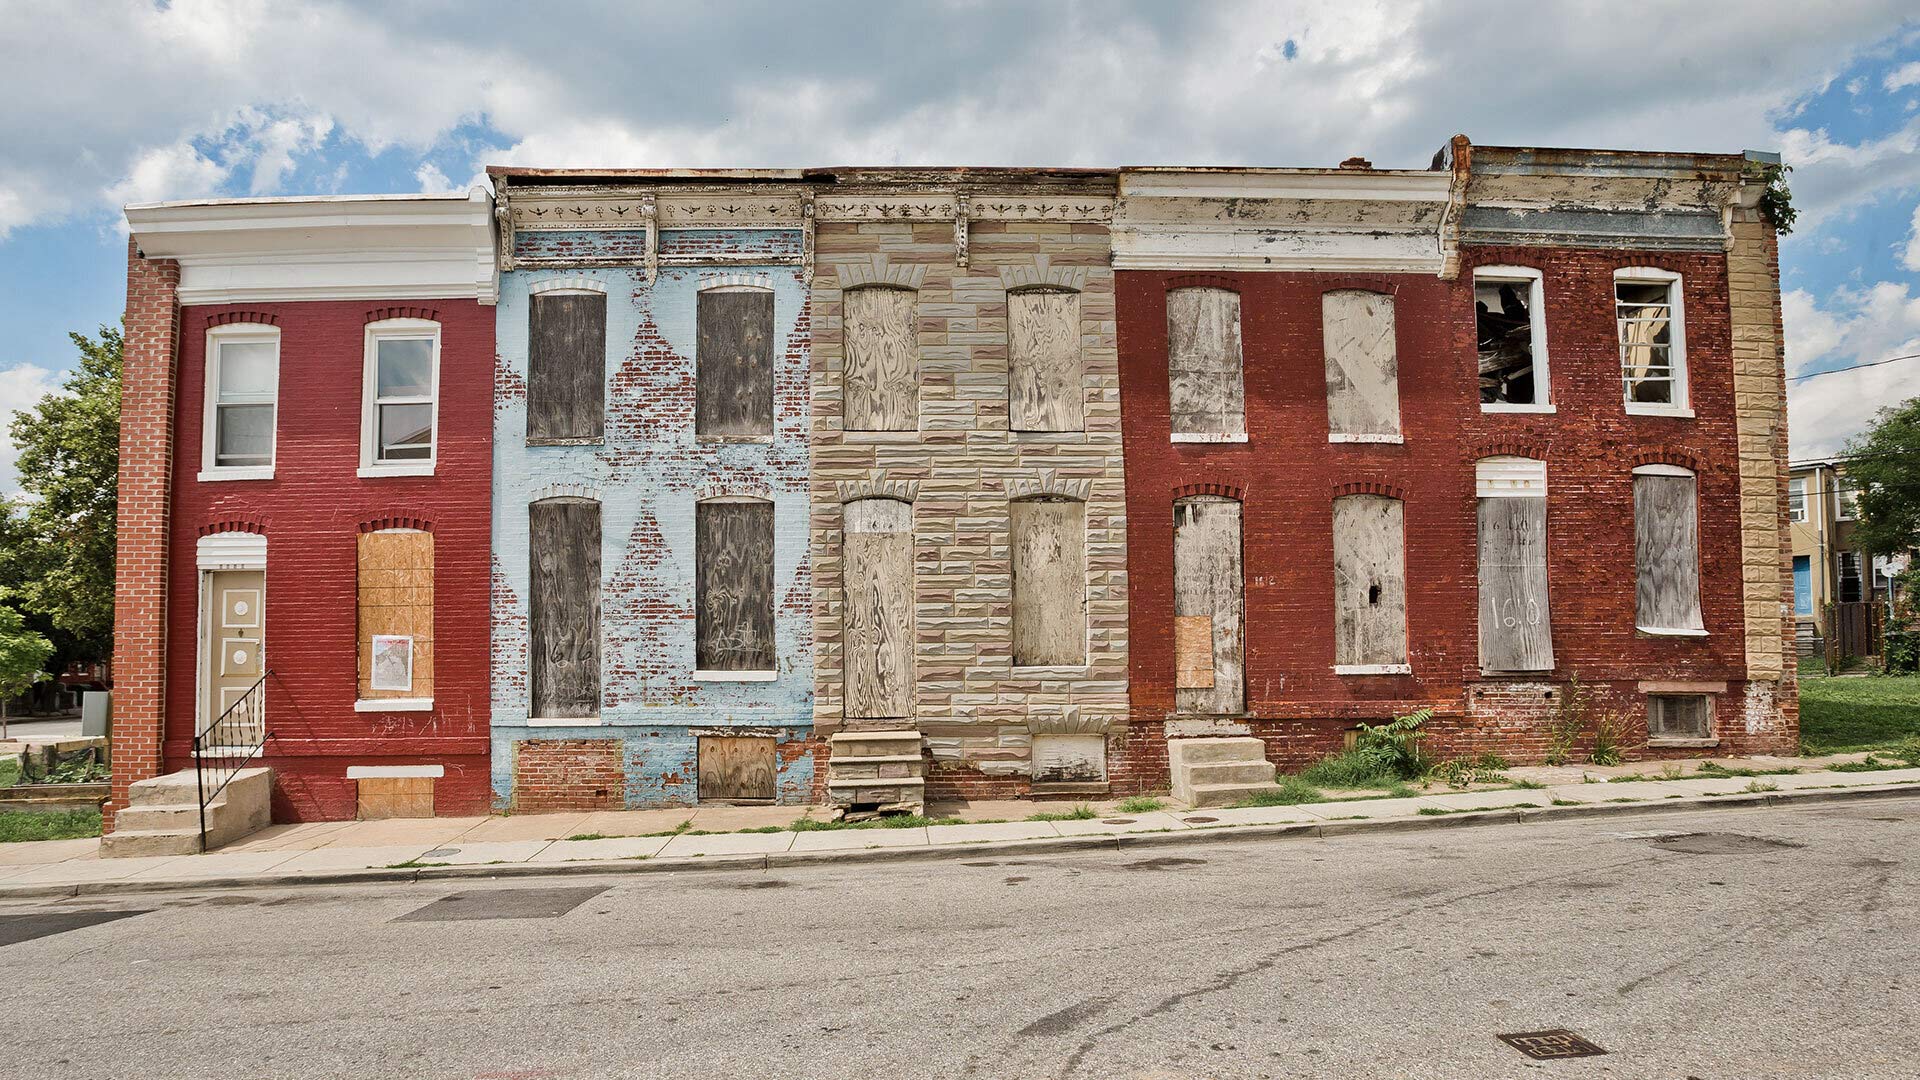 Boarded-up rowhouses are a common sight in areas of Baltimore historically subjected to discriminatory real estate policies. New UMD research shows that people today living in once- "redlined" neighborhoods still have shorter lifespans than those living elsewhere, along with other enduring systemic disadvantages. Photo by John T. Consoli.